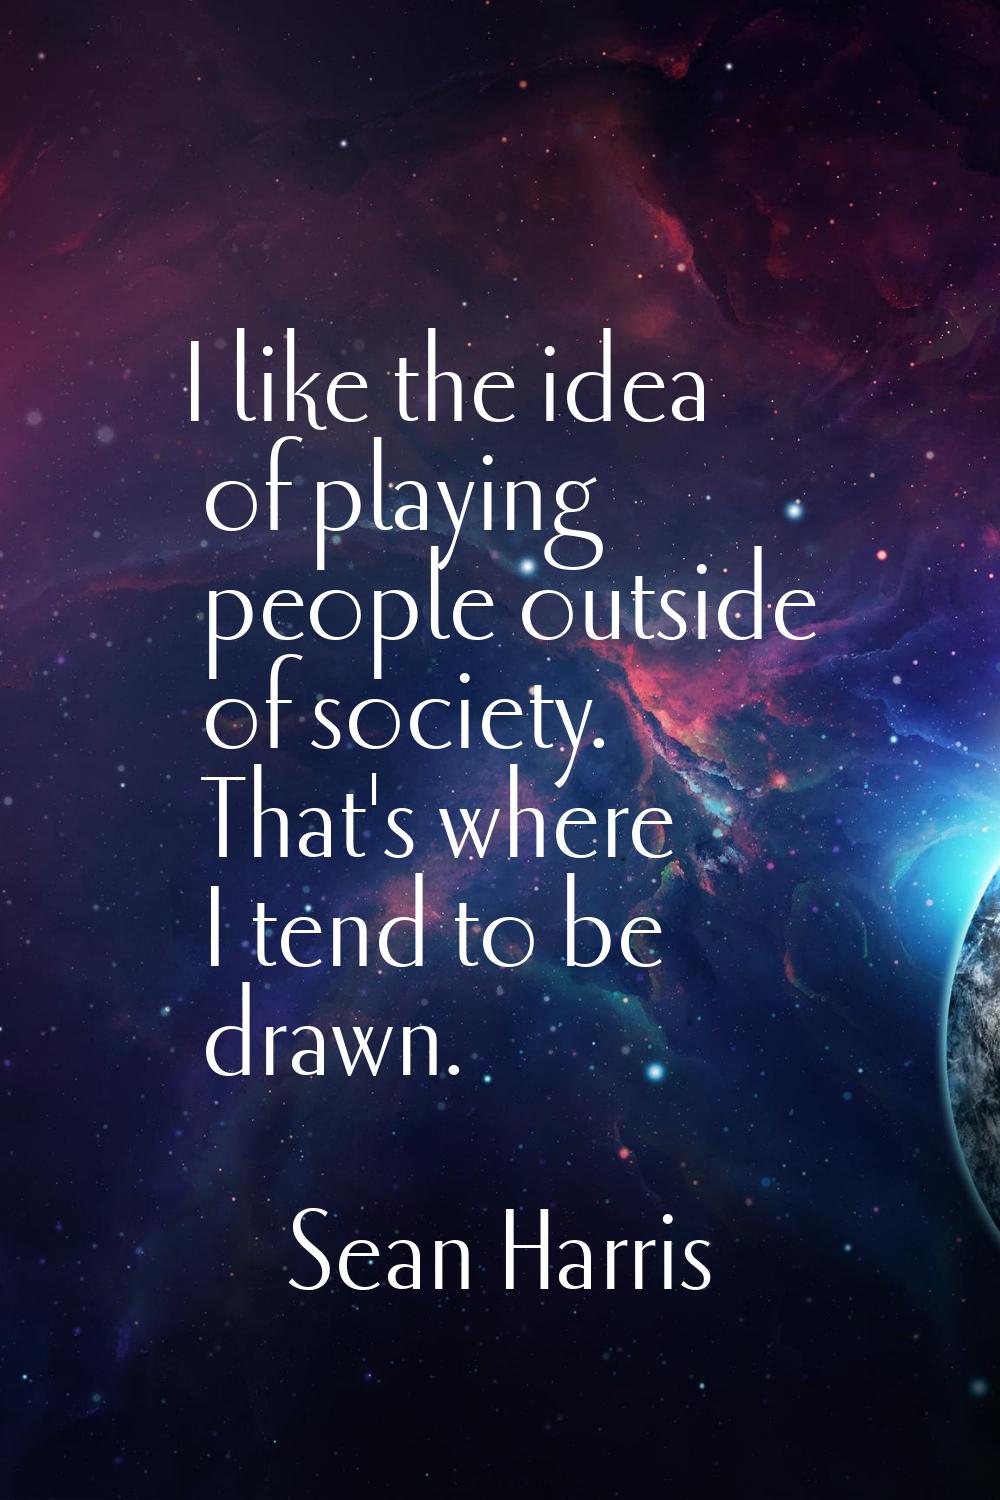 I like the idea of playing people outside of society. That's where I tend to be drawn.